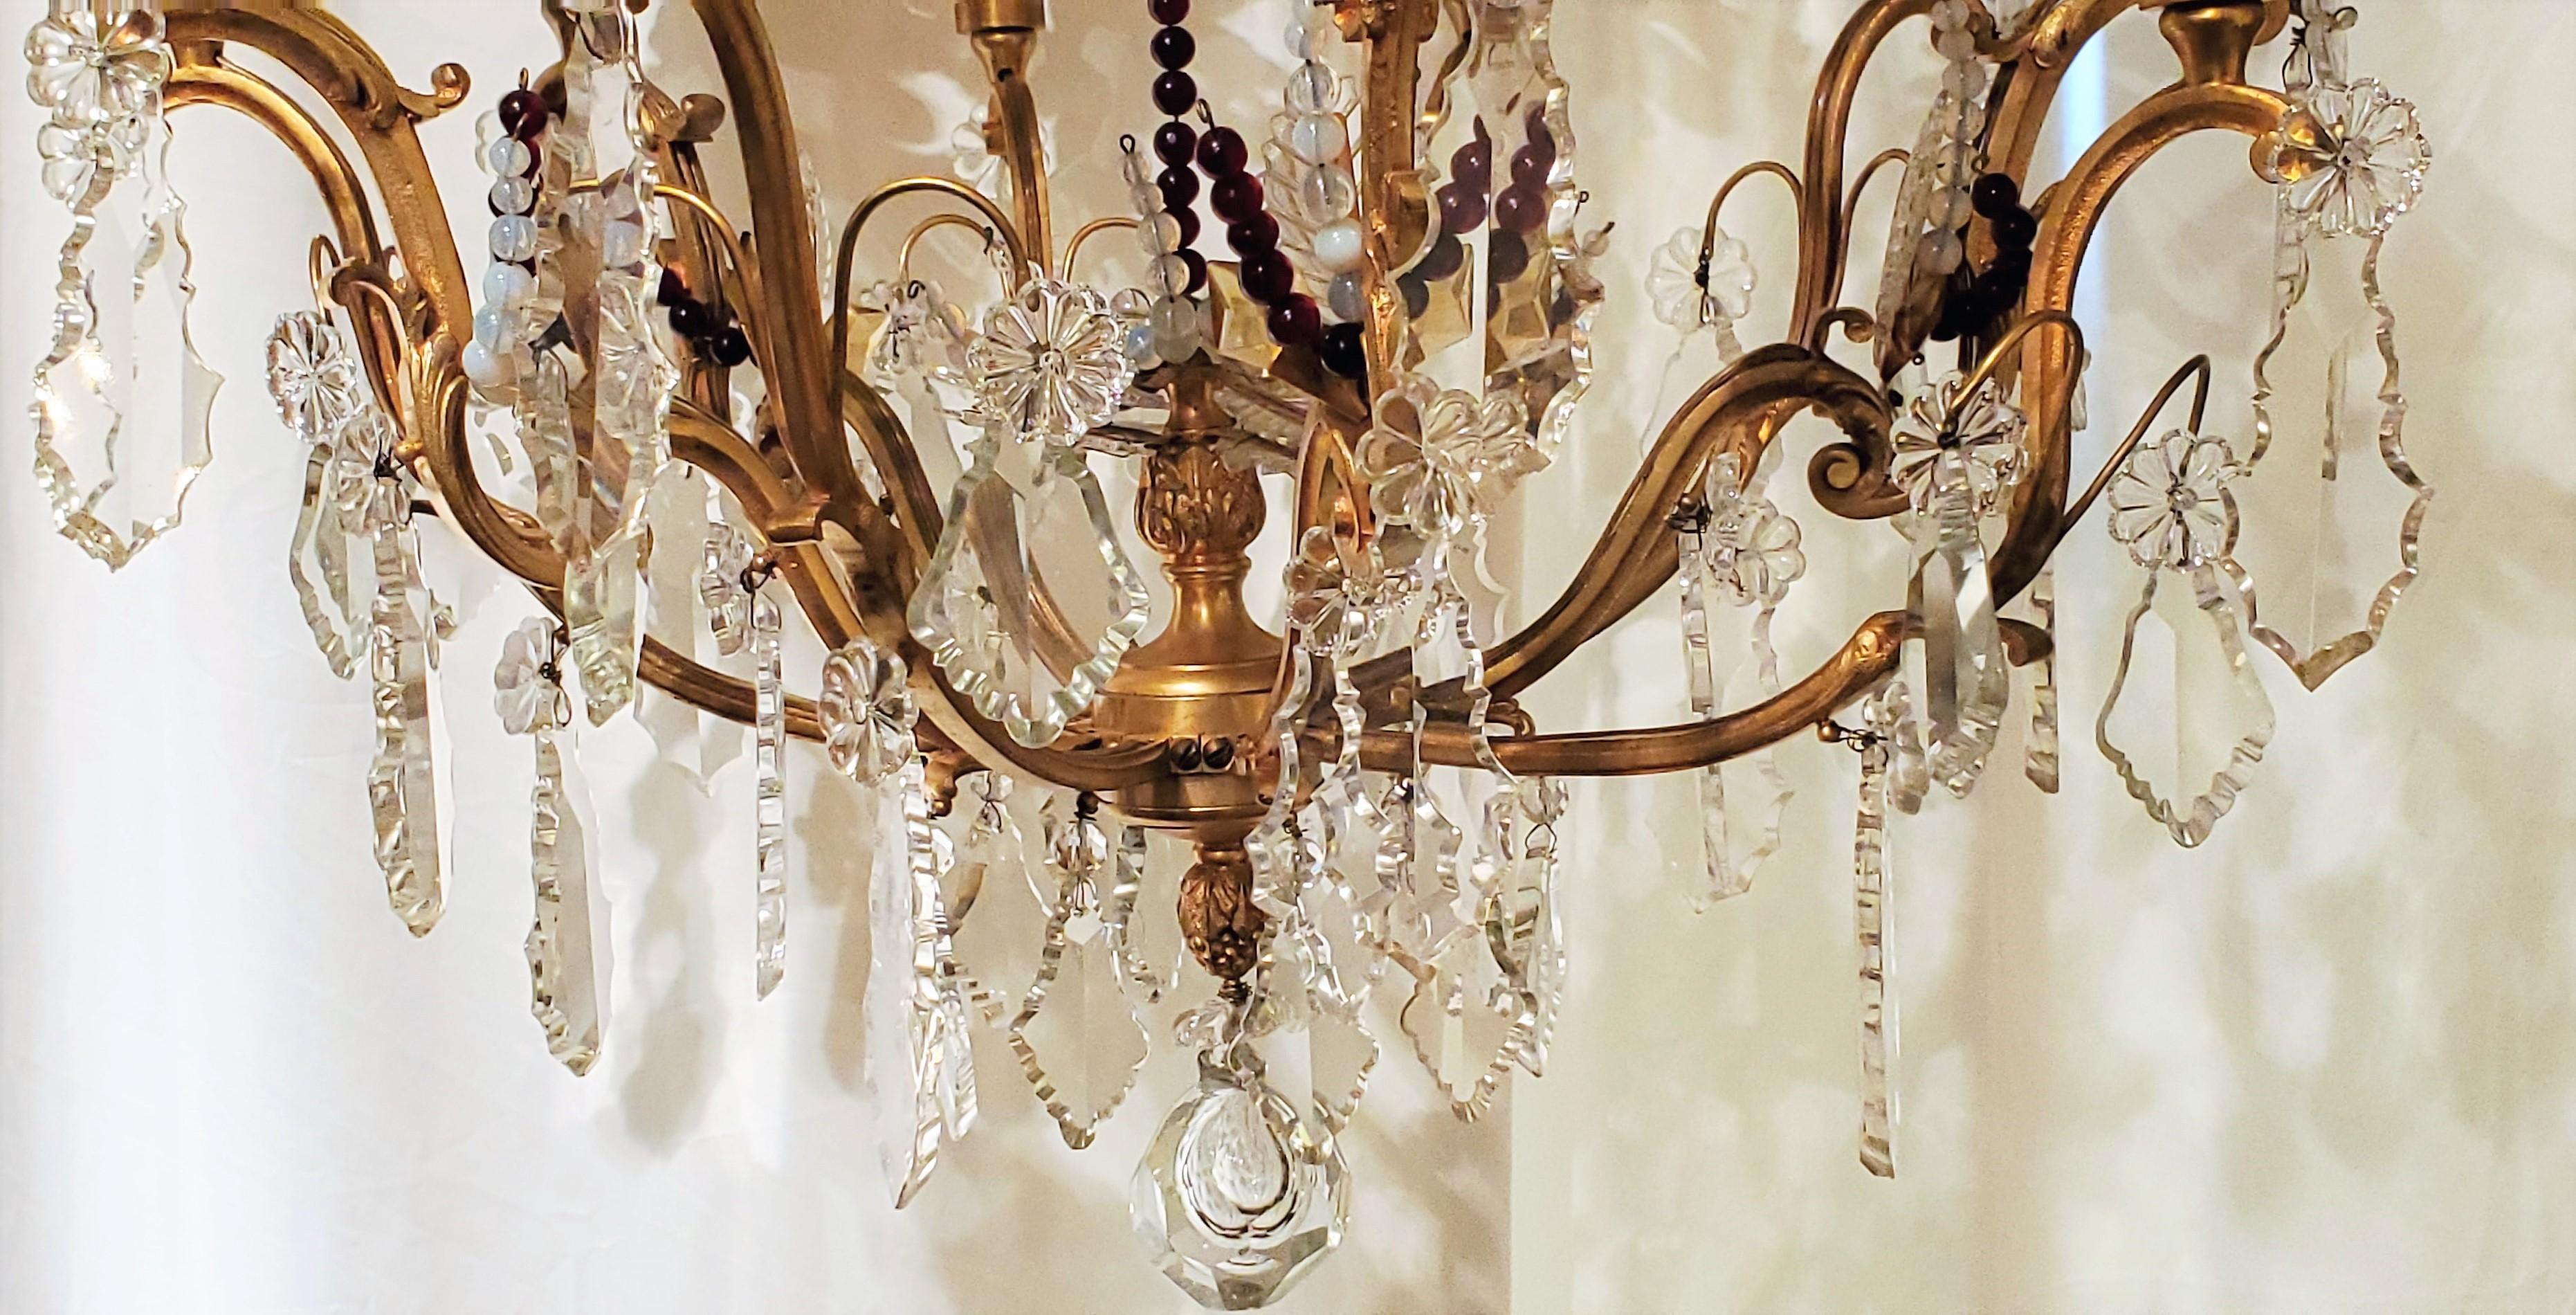 Antique French Gold Bronze and Crystal Chandelier, circa 1870-1880 In Good Condition For Sale In New Orleans, LA